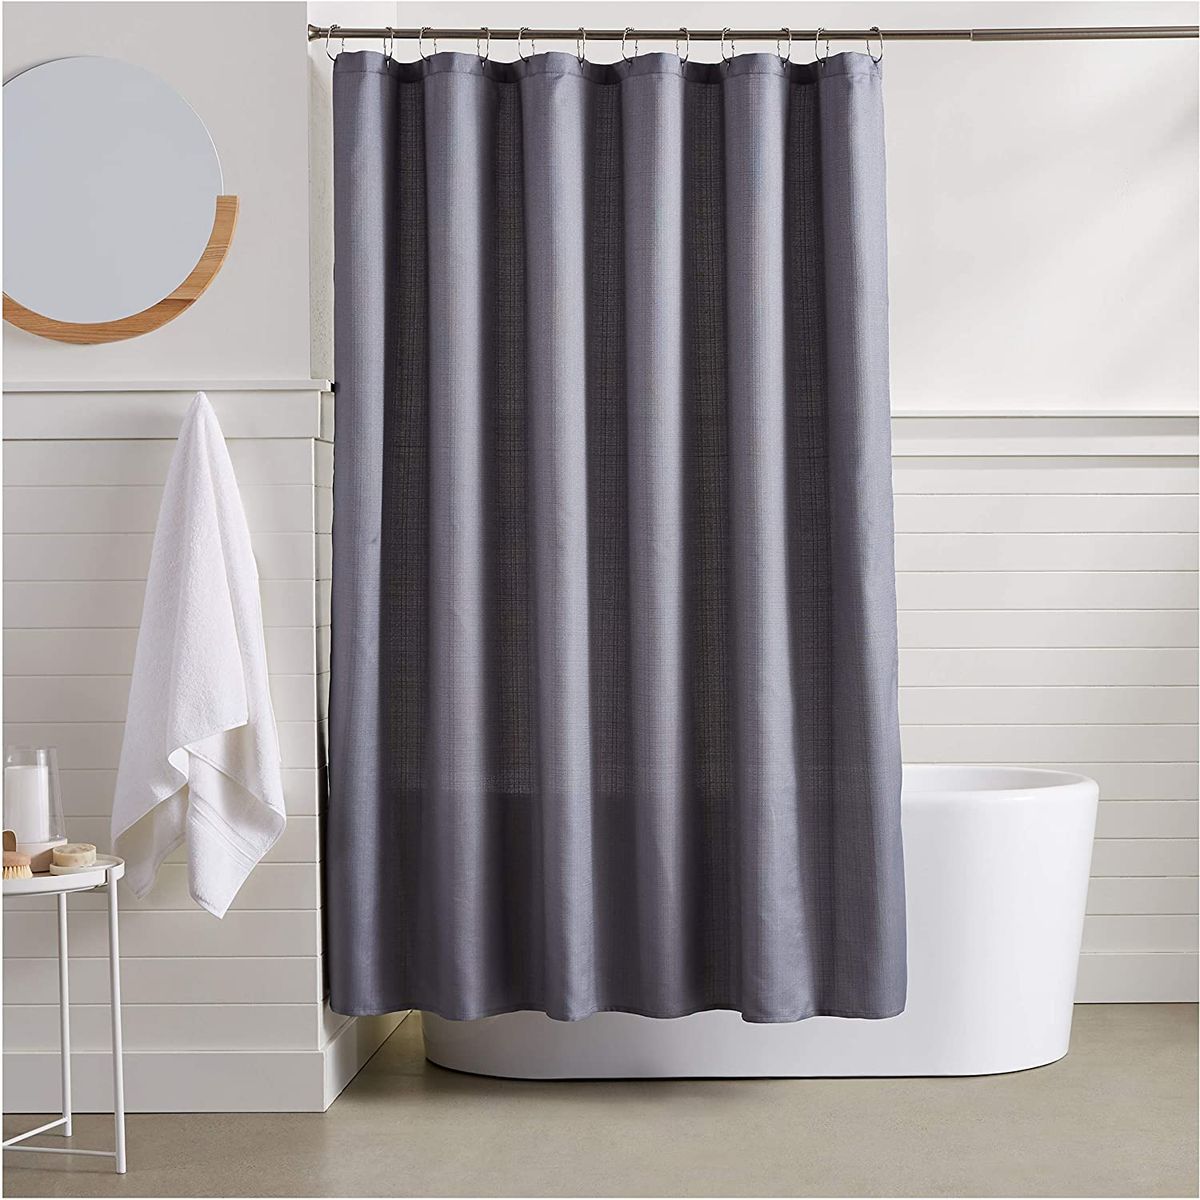 19 Best Shower Curtains 2022 The, Photos Of Bathrooms With Shower Curtains